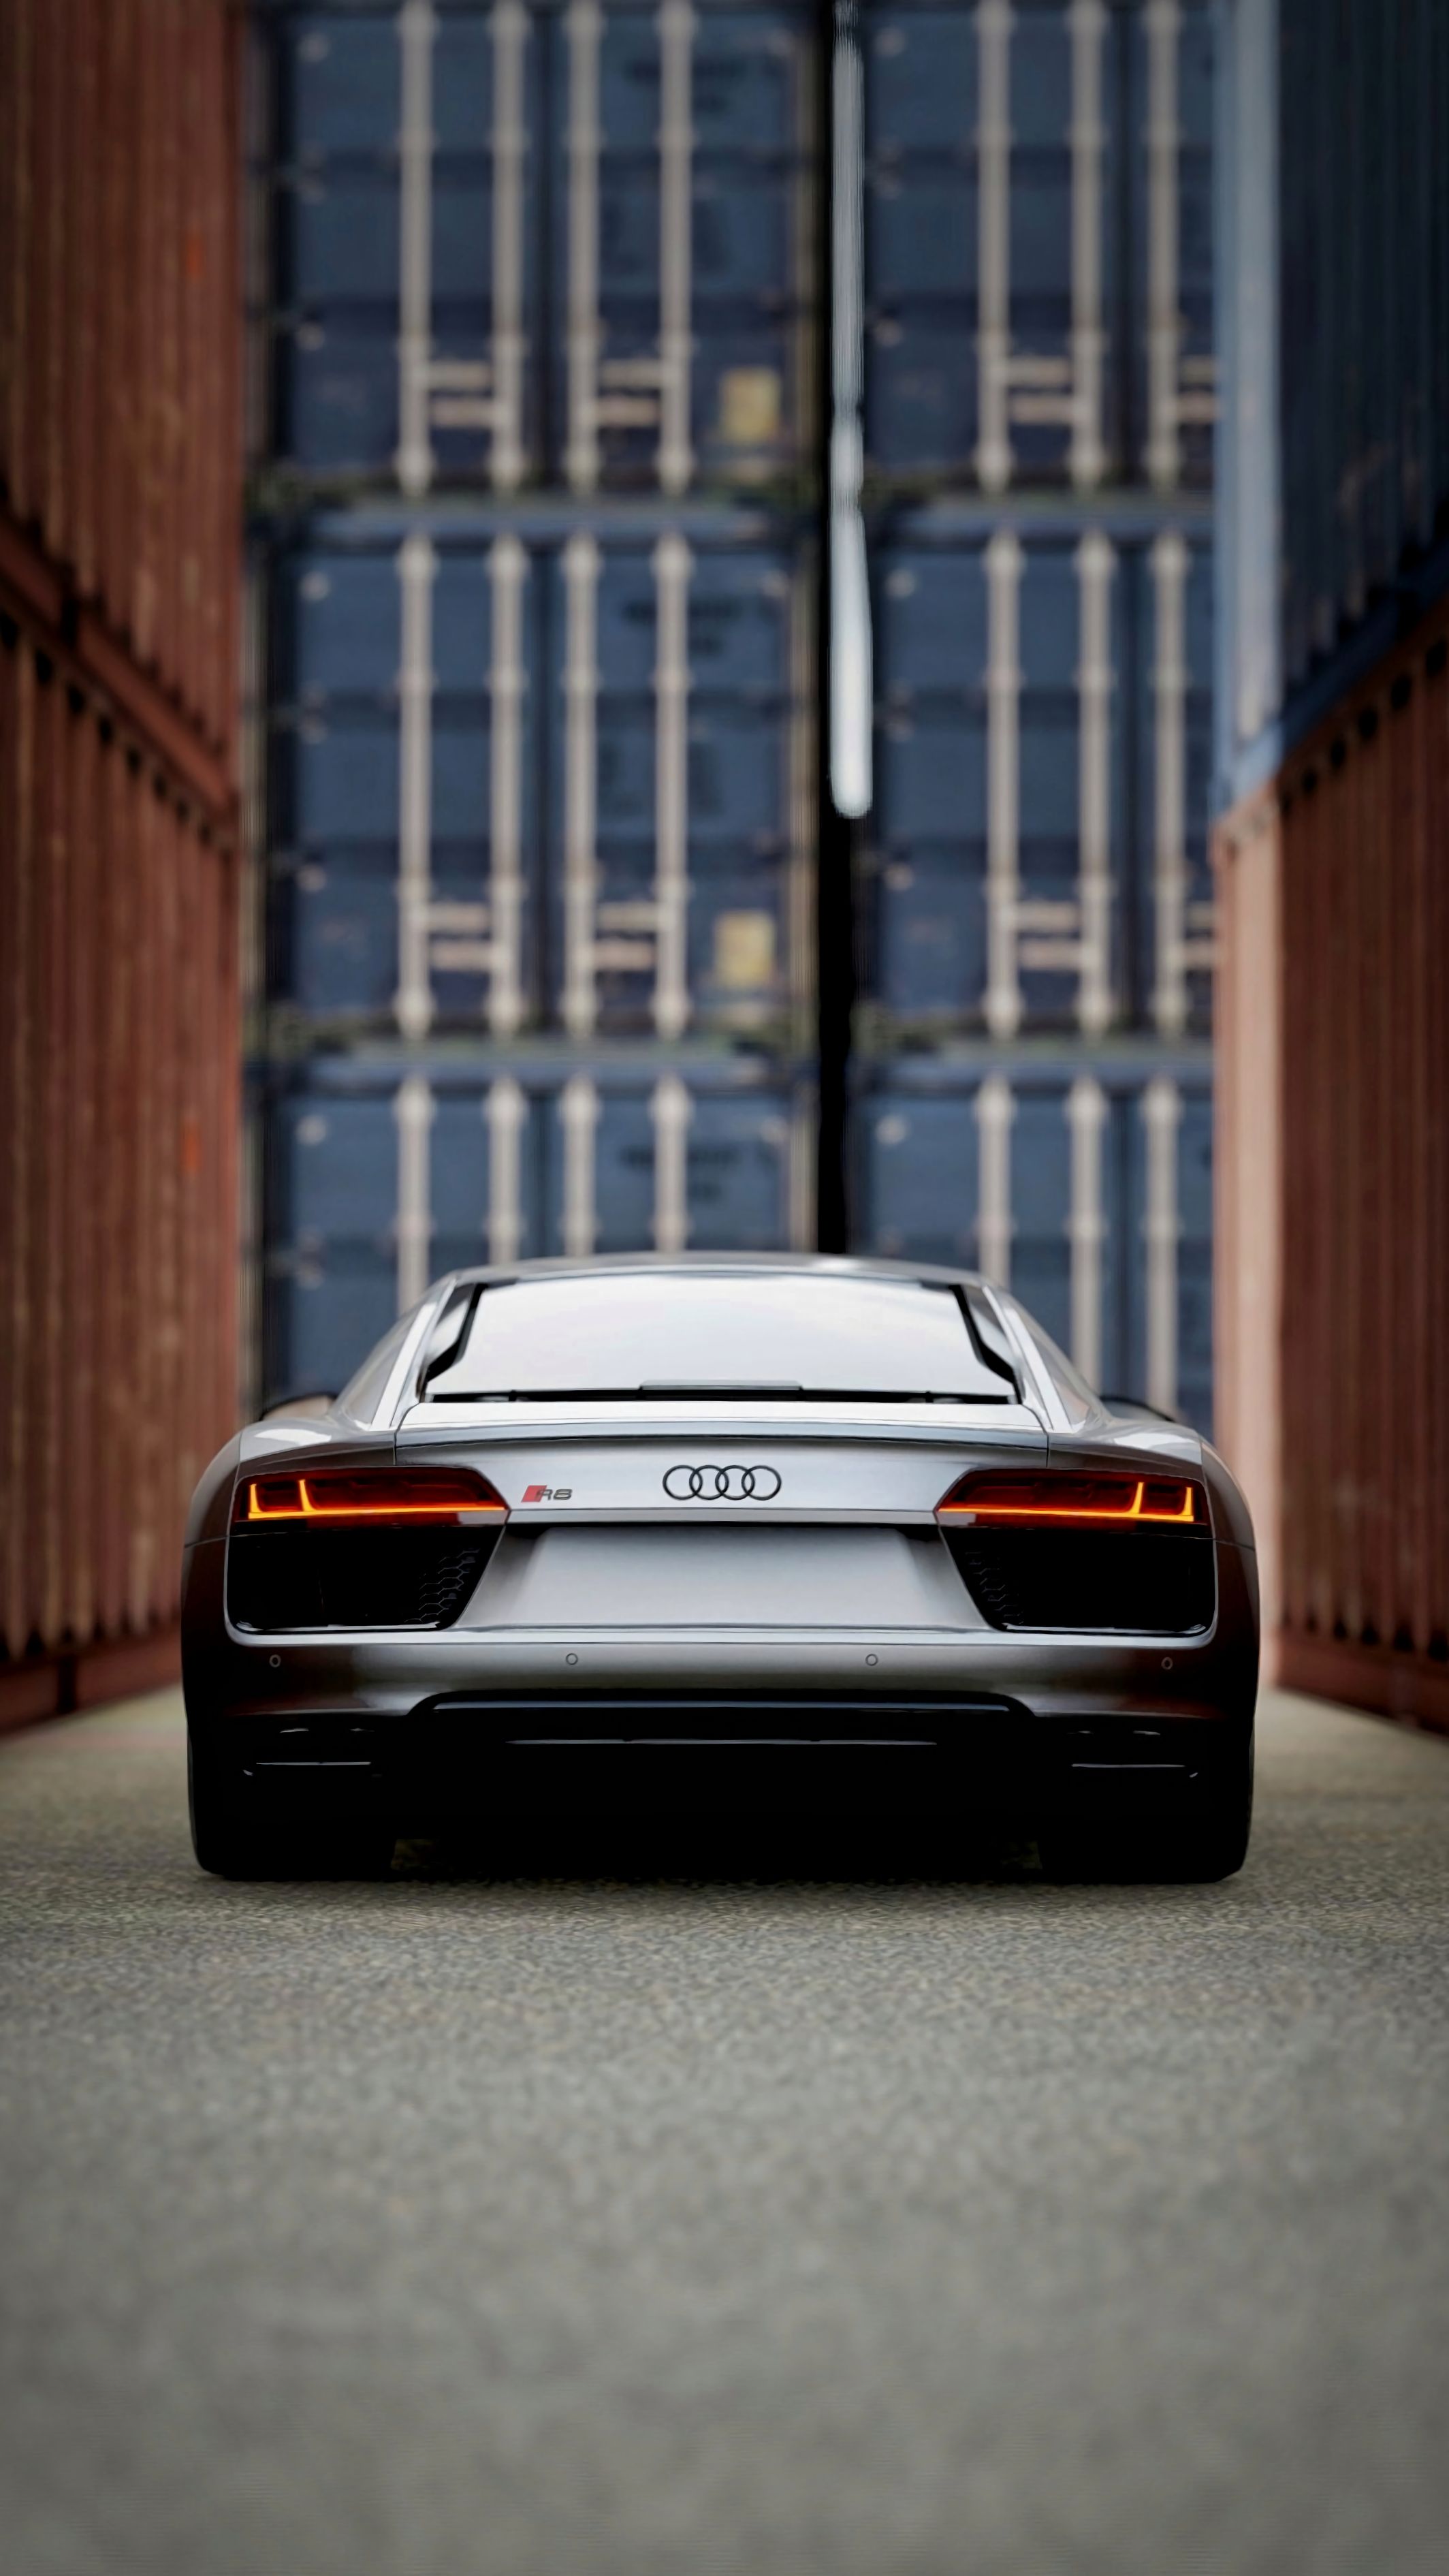 85682 download wallpaper cars, audi, sports, sports car, back view, rear view screensavers and pictures for free